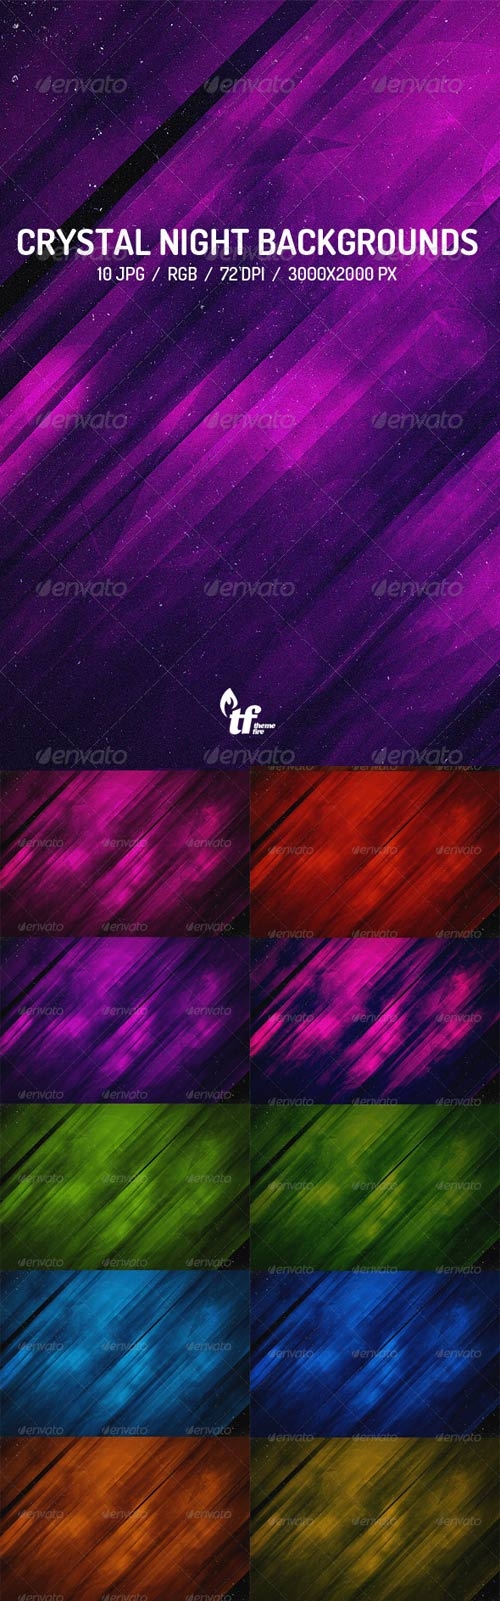  Crystal Night Backgrounds